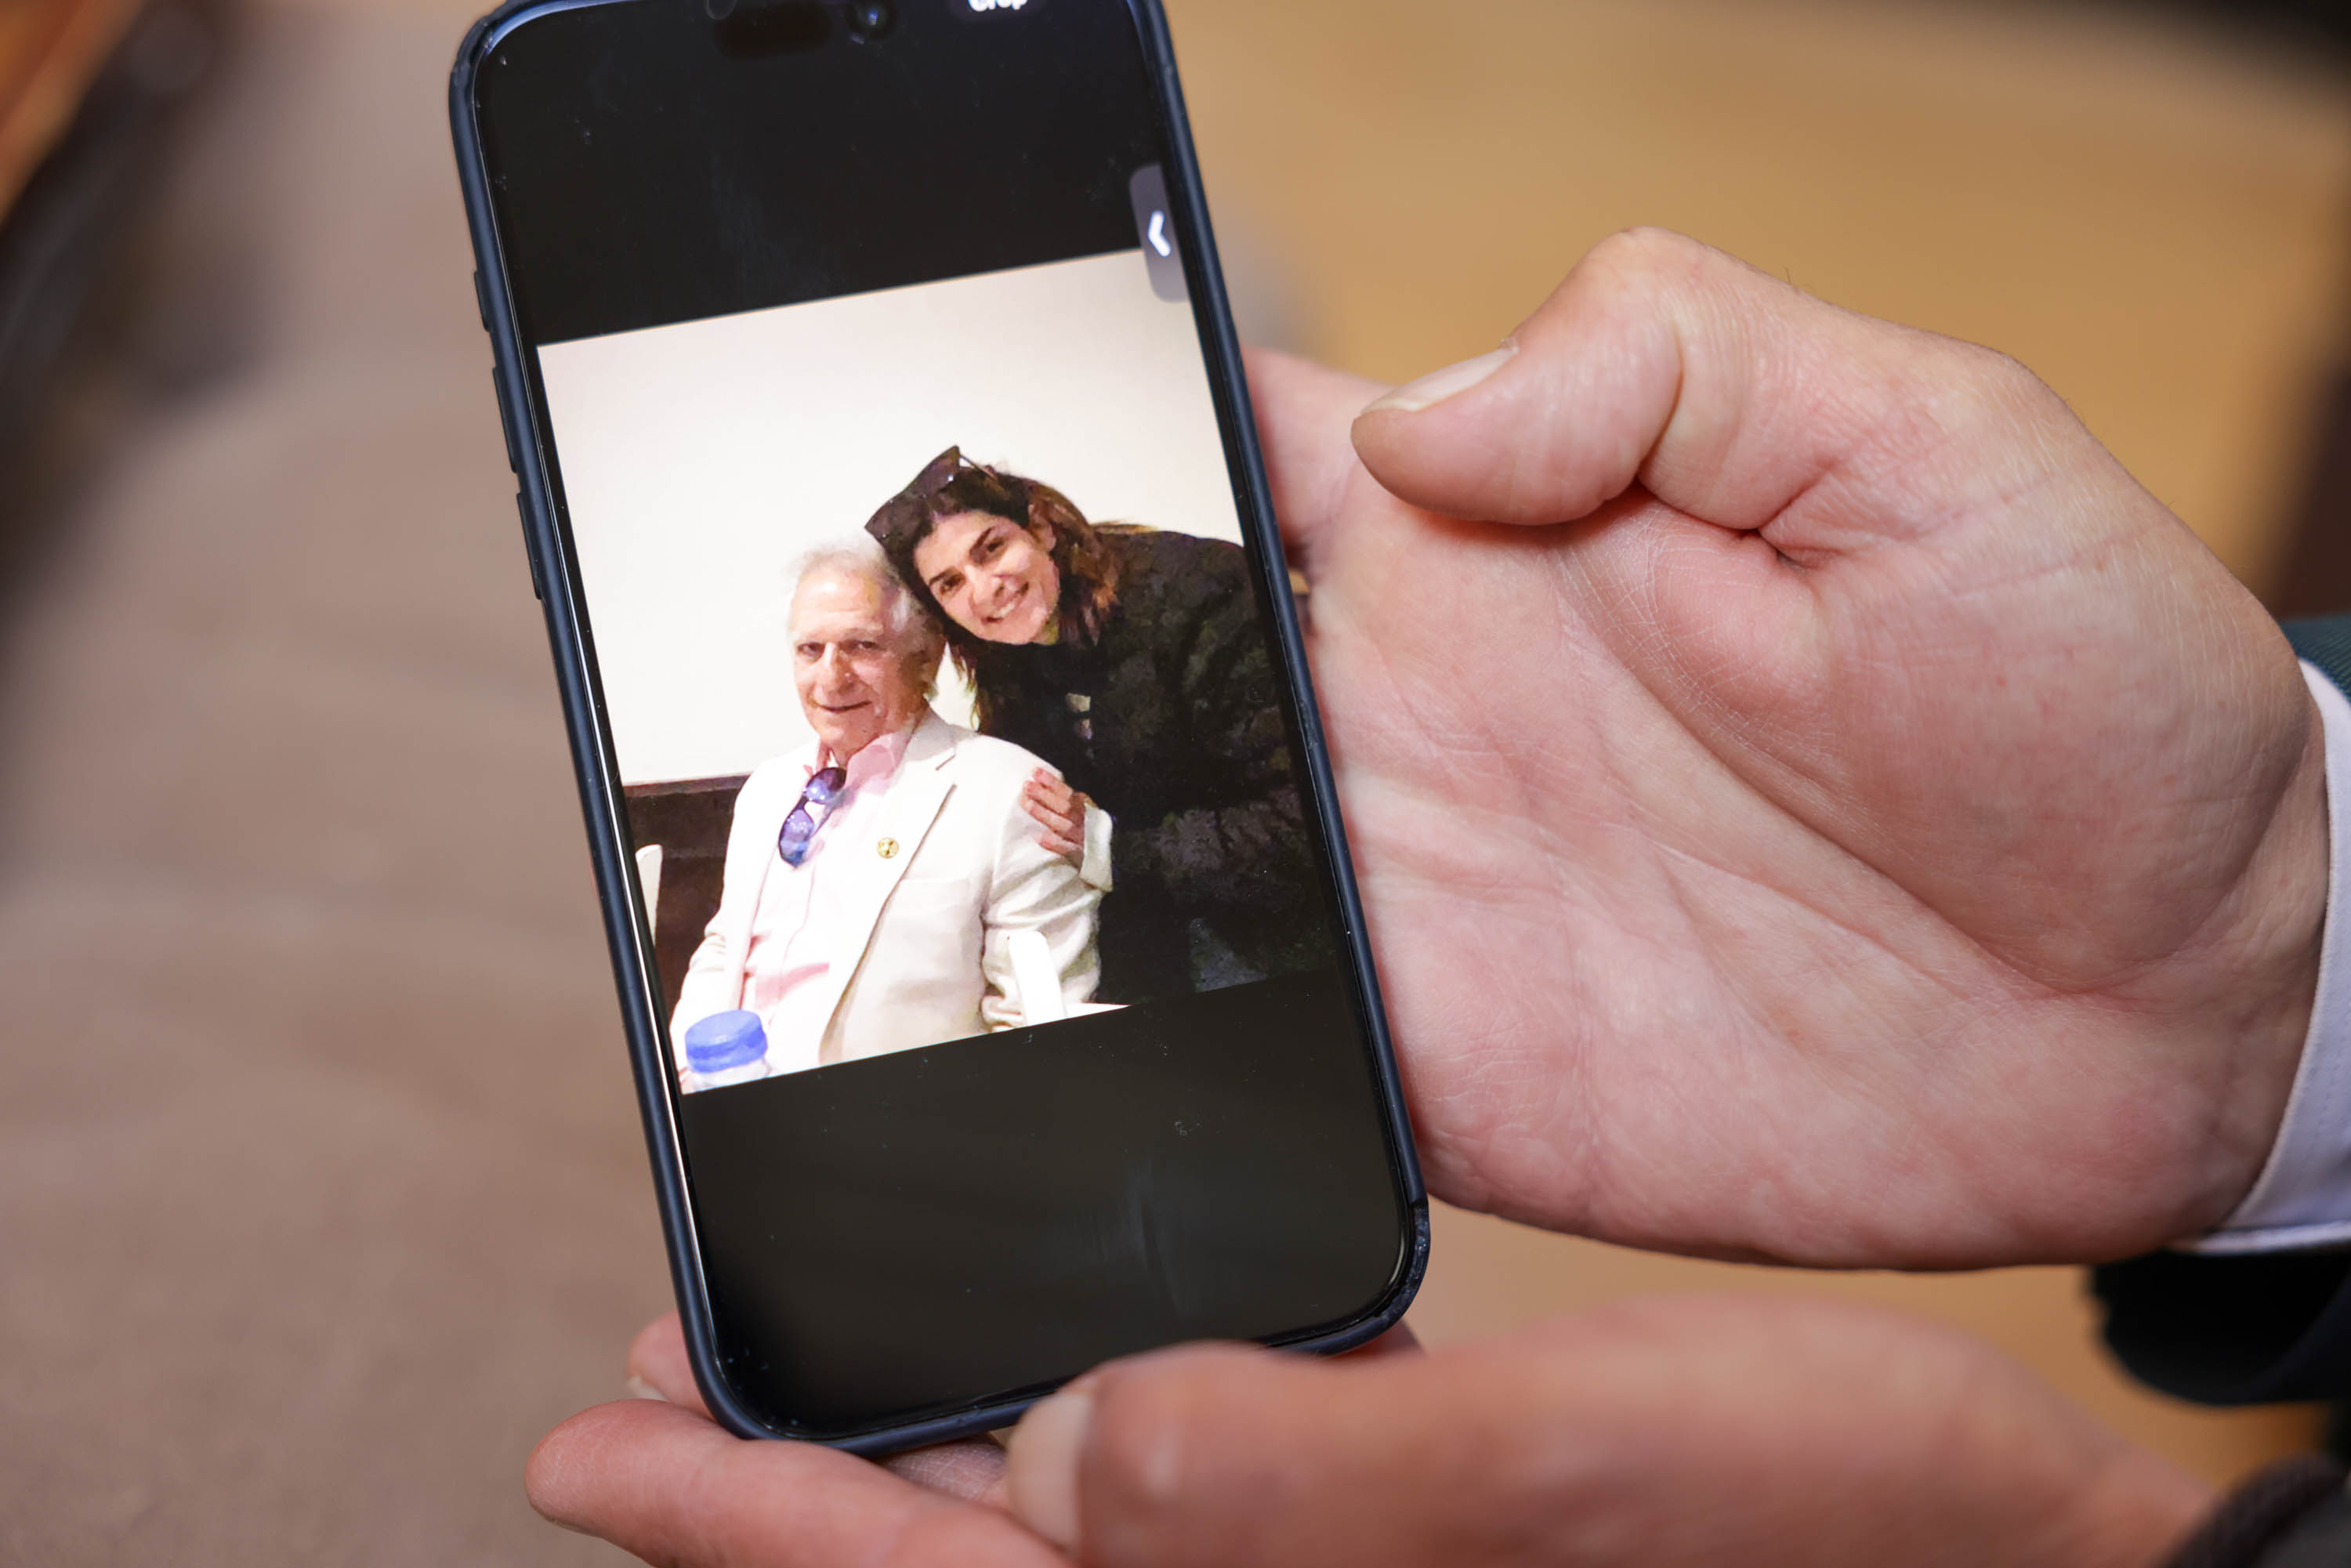 A photo on a phone shows an older person and a younger person smiling together.